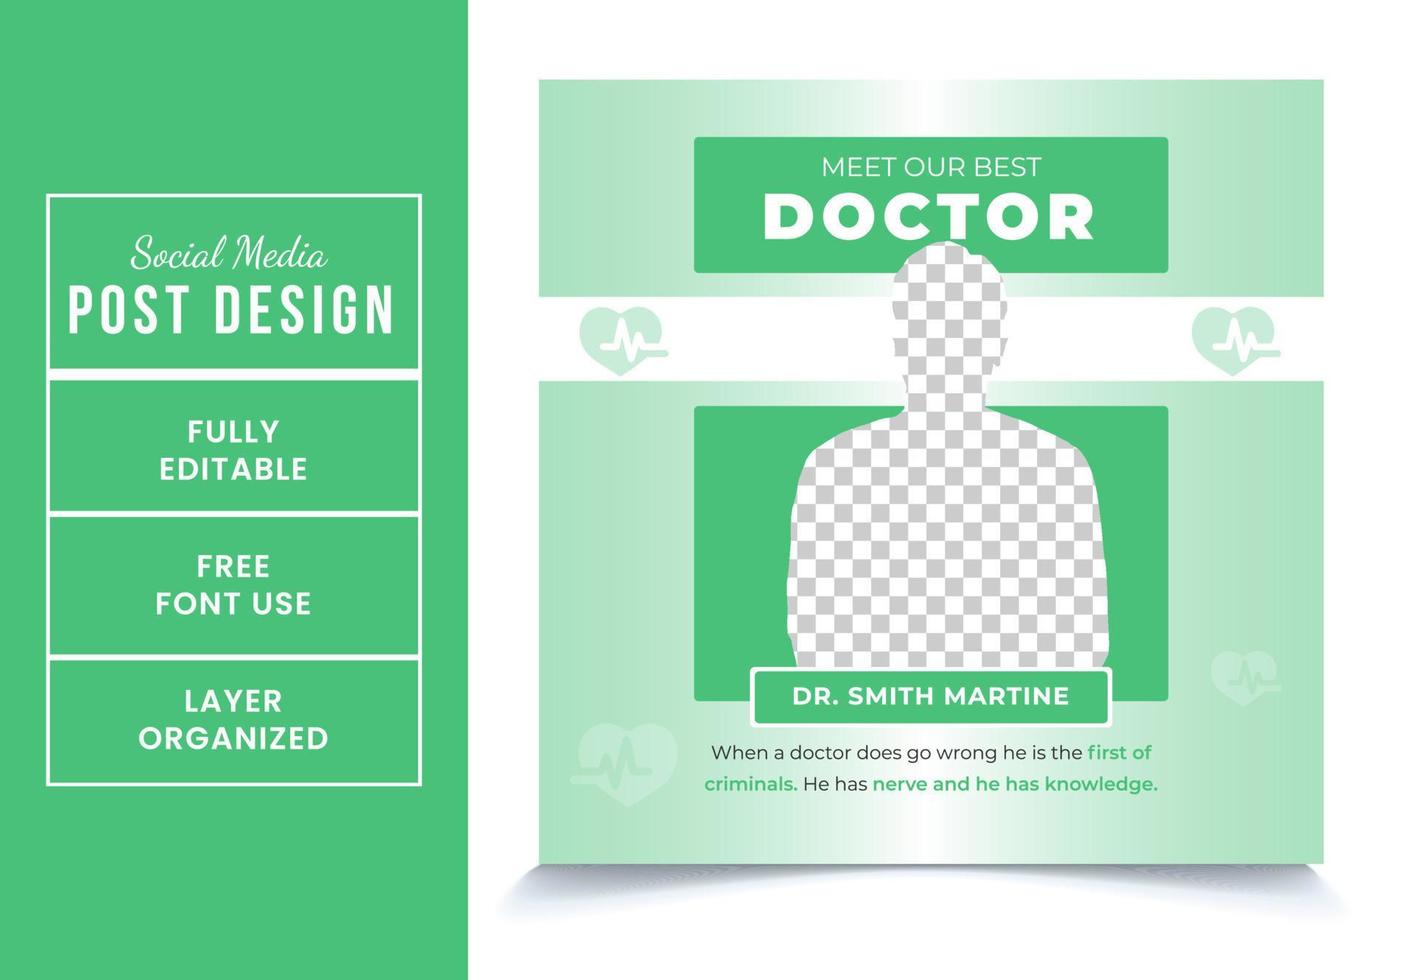 Meet our best doctor promotional medical service social media post design template fully editable EPS file format High quality easy to customize vector